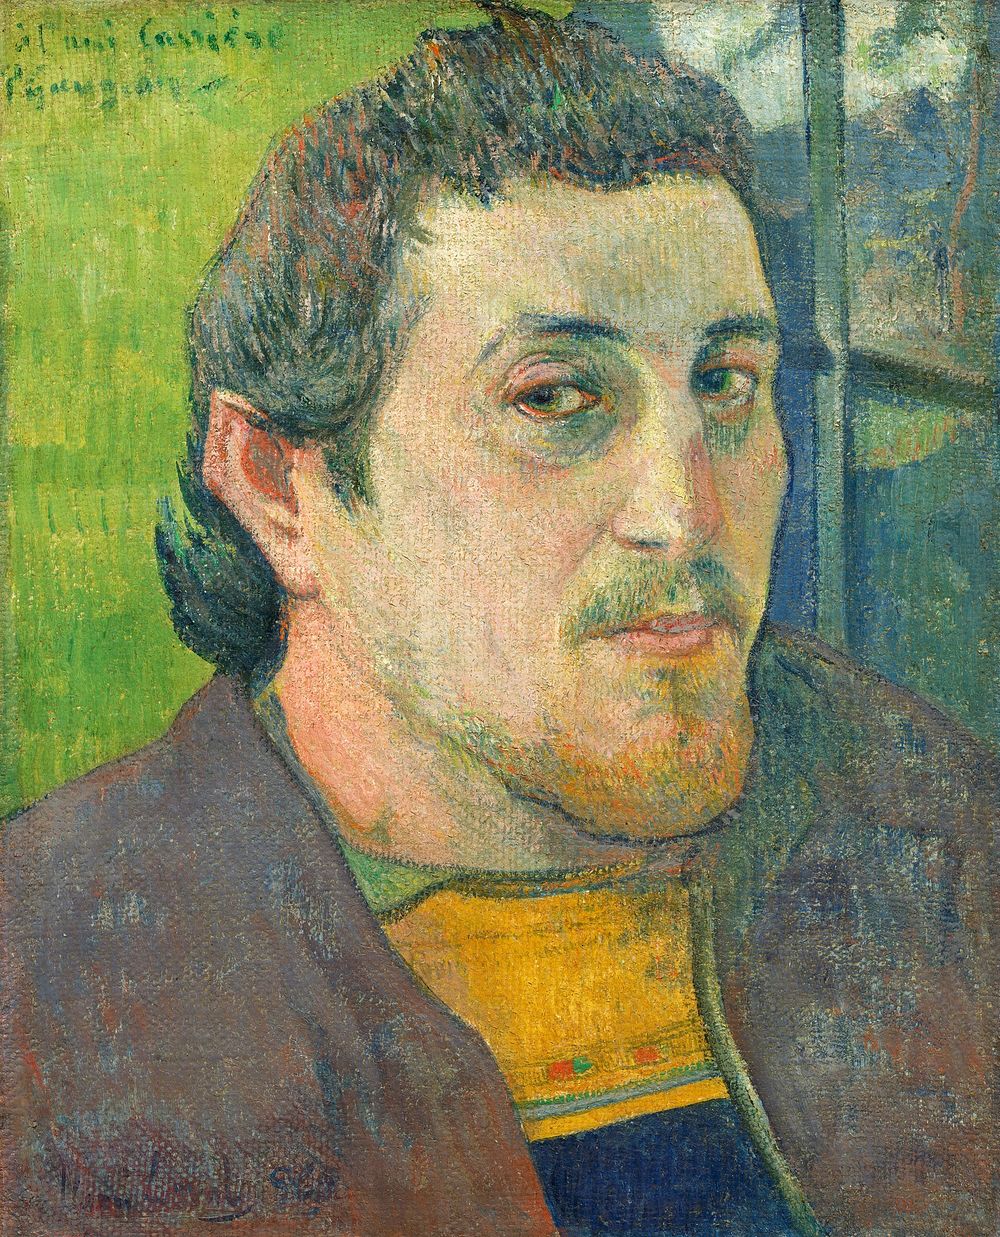 Self-Portrait Dedicated to Carri&egrave;re (1888) by Paul Gauguin. Original from The National Gallery of Art. Digitally…